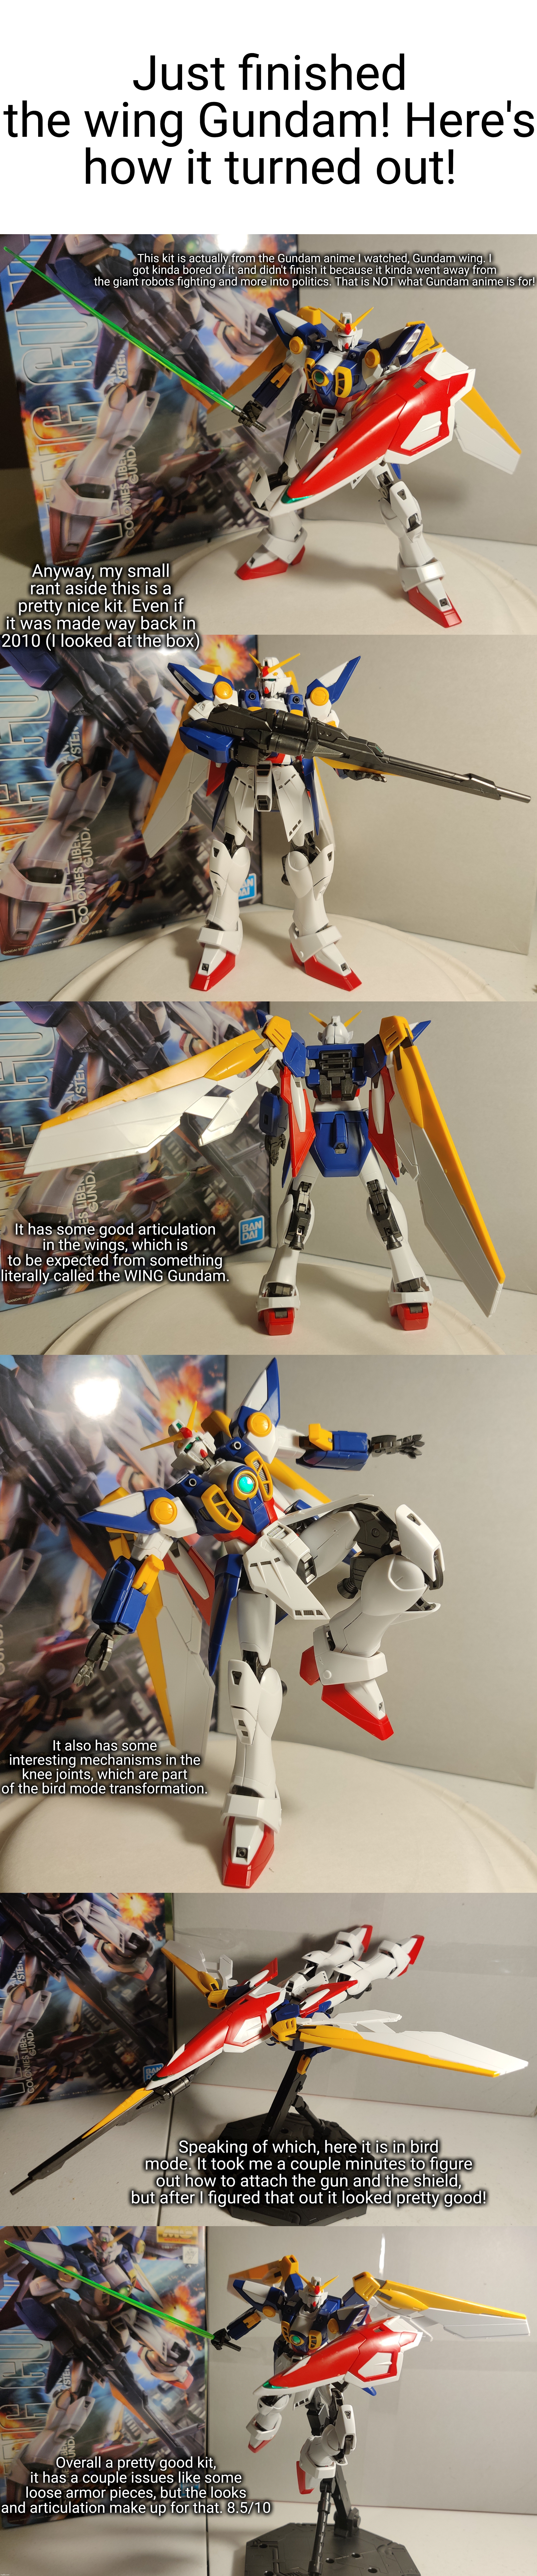 Next I'm building the aegis Gundam | Just finished the wing Gundam! Here's how it turned out! This kit is actually from the Gundam anime I watched, Gundam wing. I got kinda bored of it and didn't finish it because it kinda went away from the giant robots fighting and more into politics. That is NOT what Gundam anime is for! Anyway, my small rant aside this is a pretty nice kit. Even if it was made way back in 2010 (I looked at the box); It has some good articulation in the wings, which is to be expected from something literally called the WING Gundam. It also has some interesting mechanisms in the knee joints, which are part of the bird mode transformation. Speaking of which, here it is in bird mode. It took me a couple minutes to figure out how to attach the gun and the shield, but after I figured that out it looked pretty good! Overall a pretty good kit, it has a couple issues like some loose armor pieces, but the looks and articulation make up for that. 8.5/10 | made w/ Imgflip meme maker